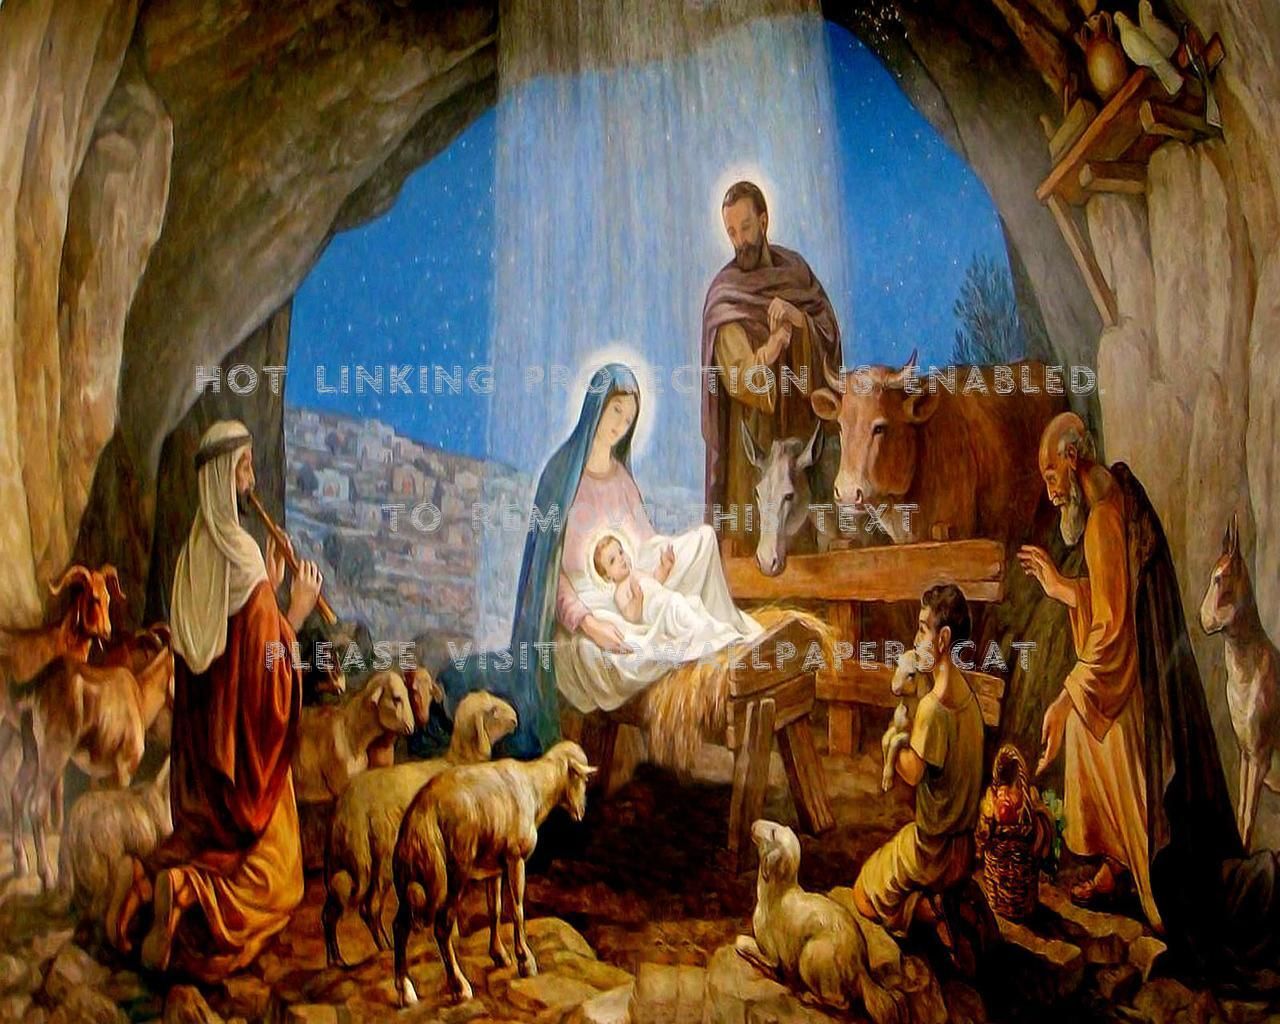 Mary and Joseph Wallpaper. Blessed Virgin Mary Wallpaper, Virgin Mary Wallpaper and Mary Day of the Dead Wallpaper